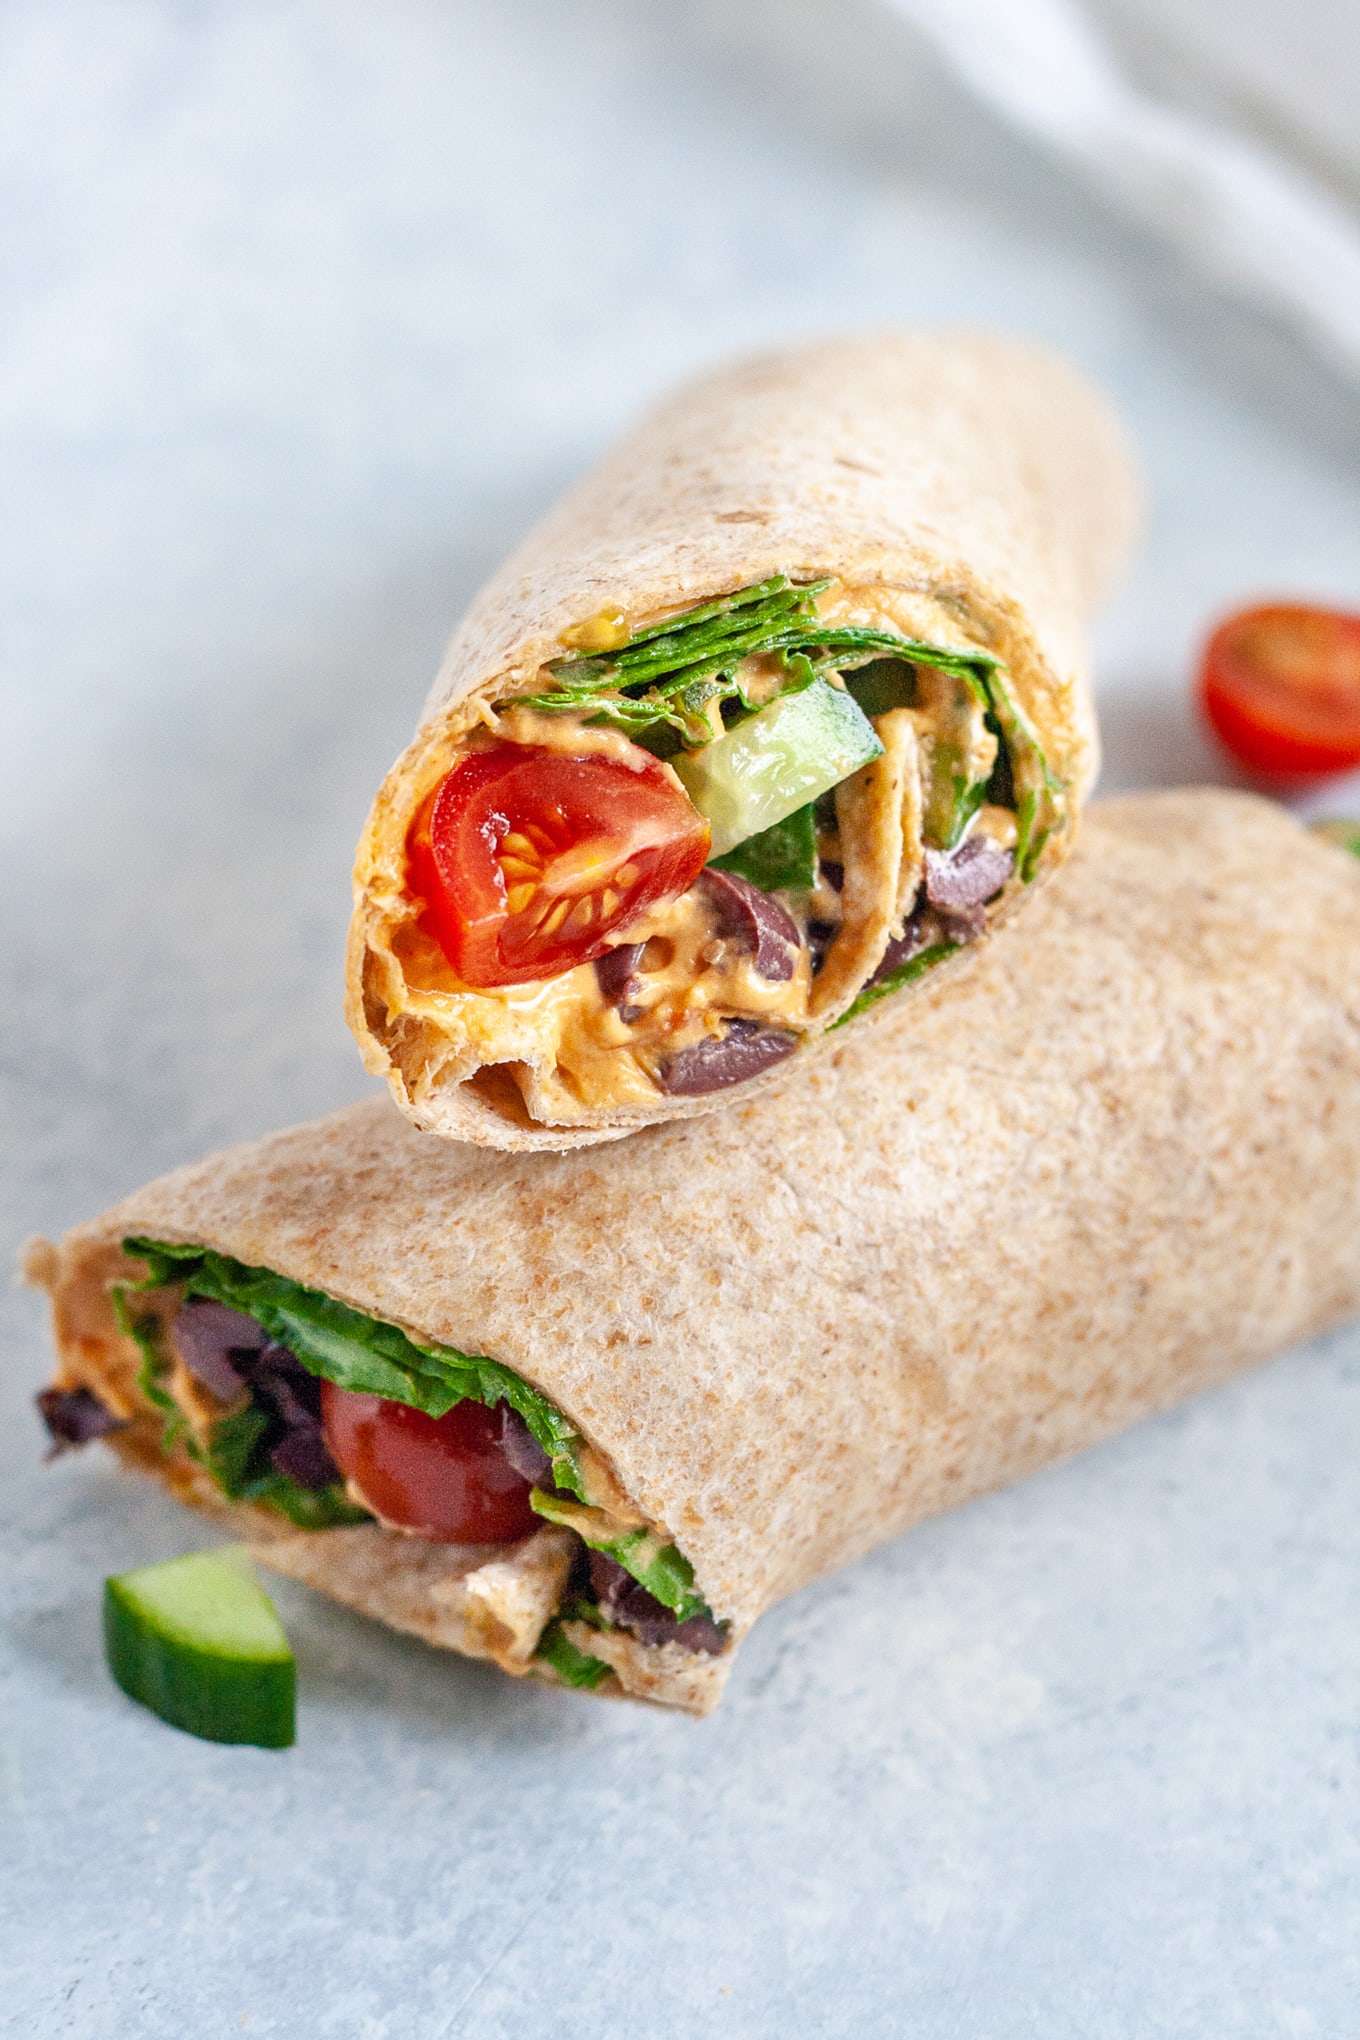 15 Quick and Easy Healthy Wrap Recipes